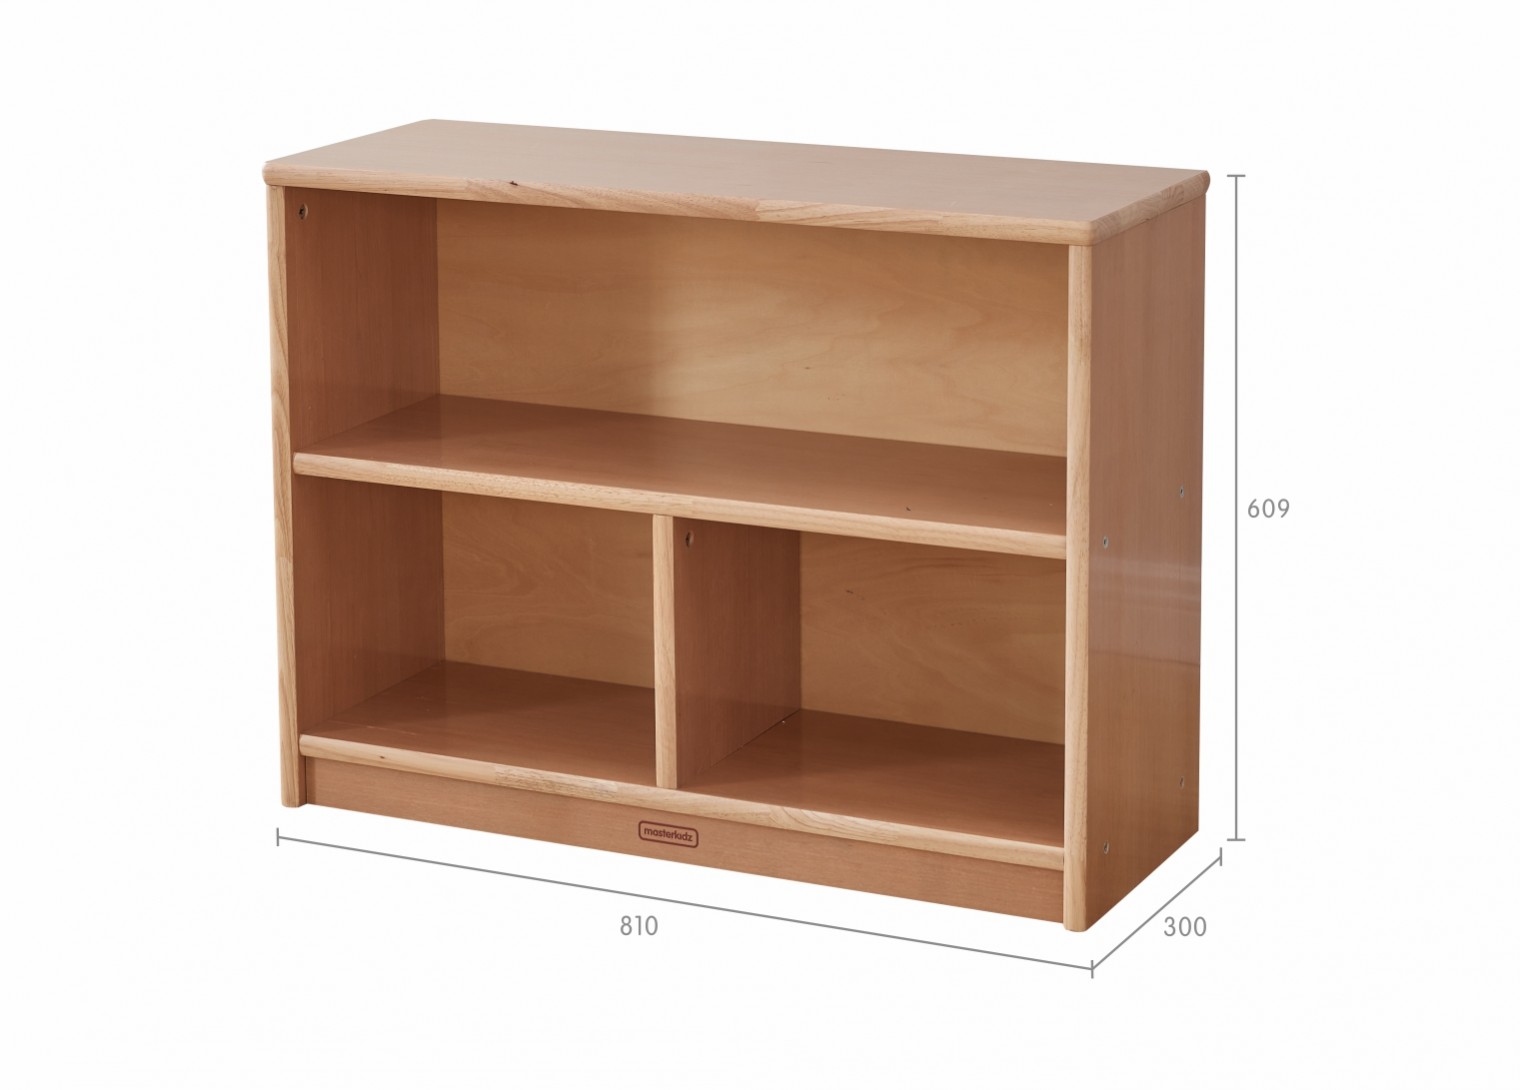 Forest School - 609H x 810L Wooden  3-Compartment Shelving Unit - Wooden Back